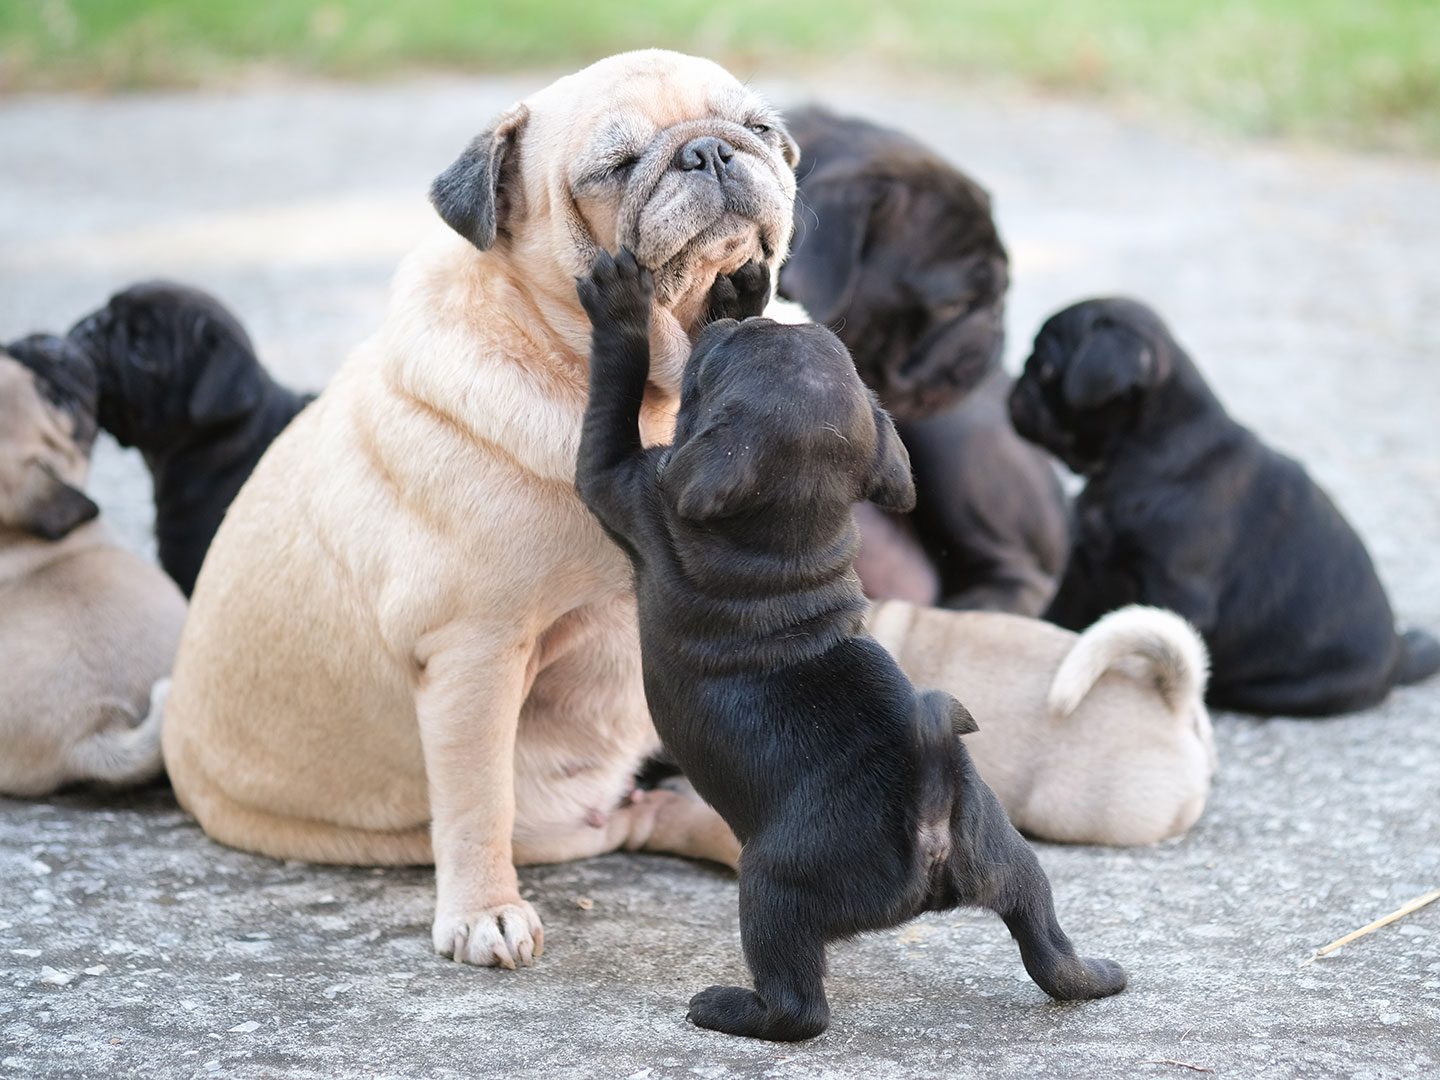 Pug puppy playing with parent